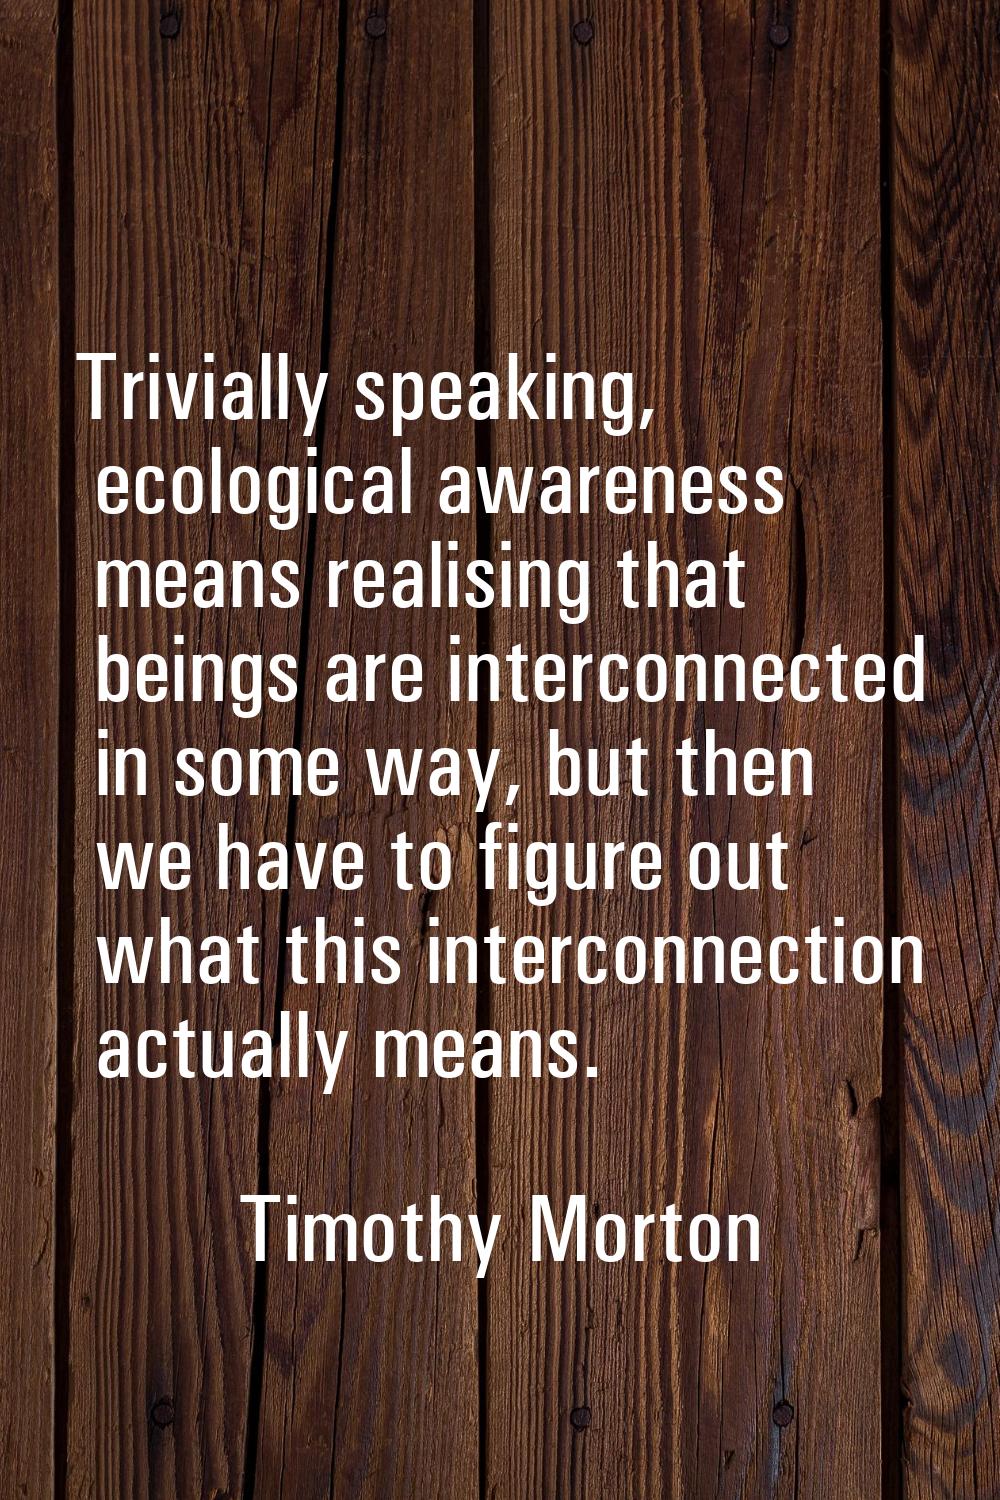 Trivially speaking, ecological awareness means realising that beings are interconnected in some way